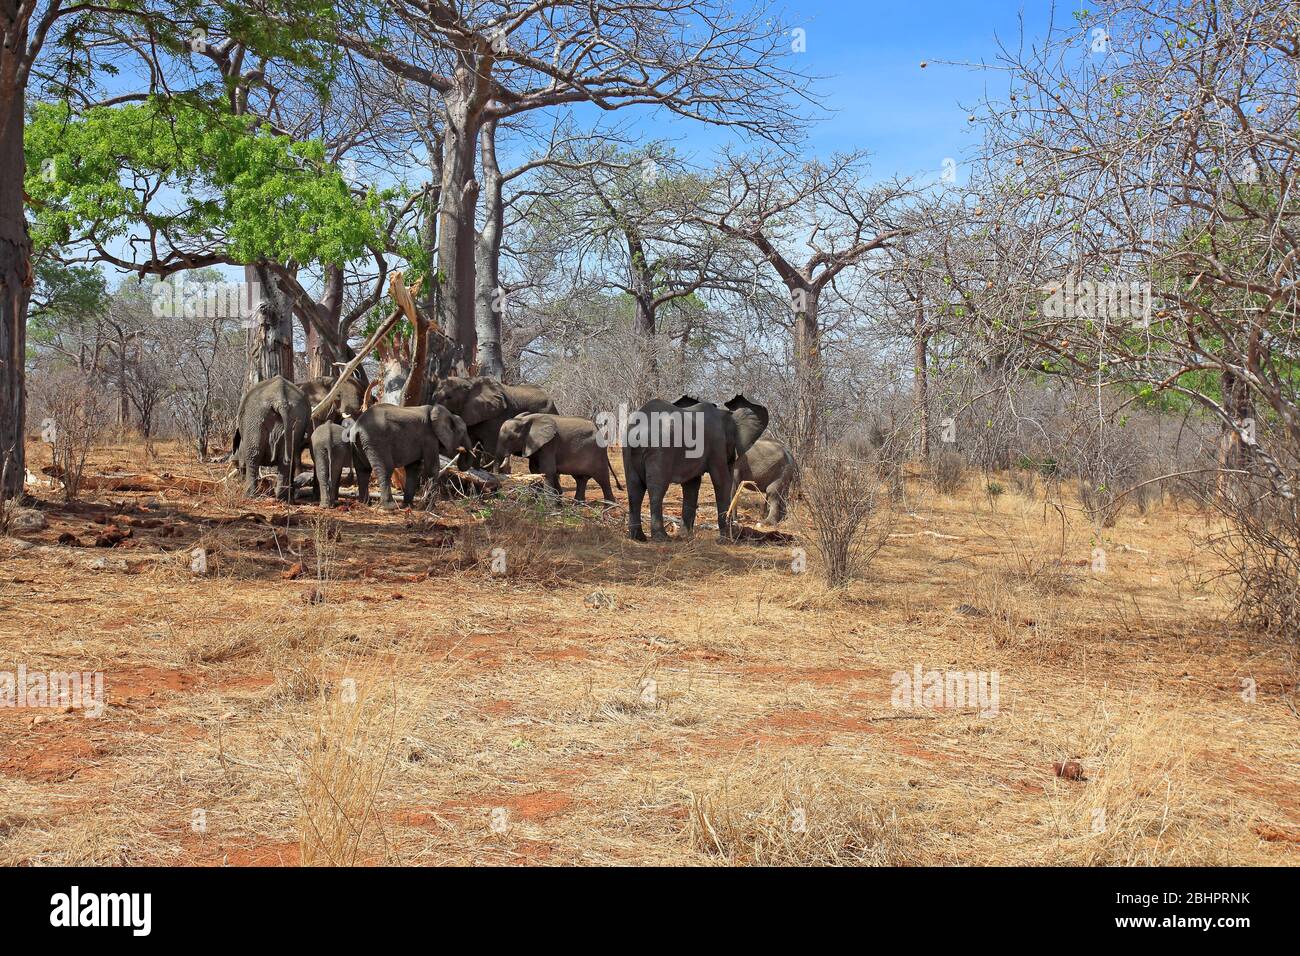 Family of elephants stripping and eating a tree Stock Photo